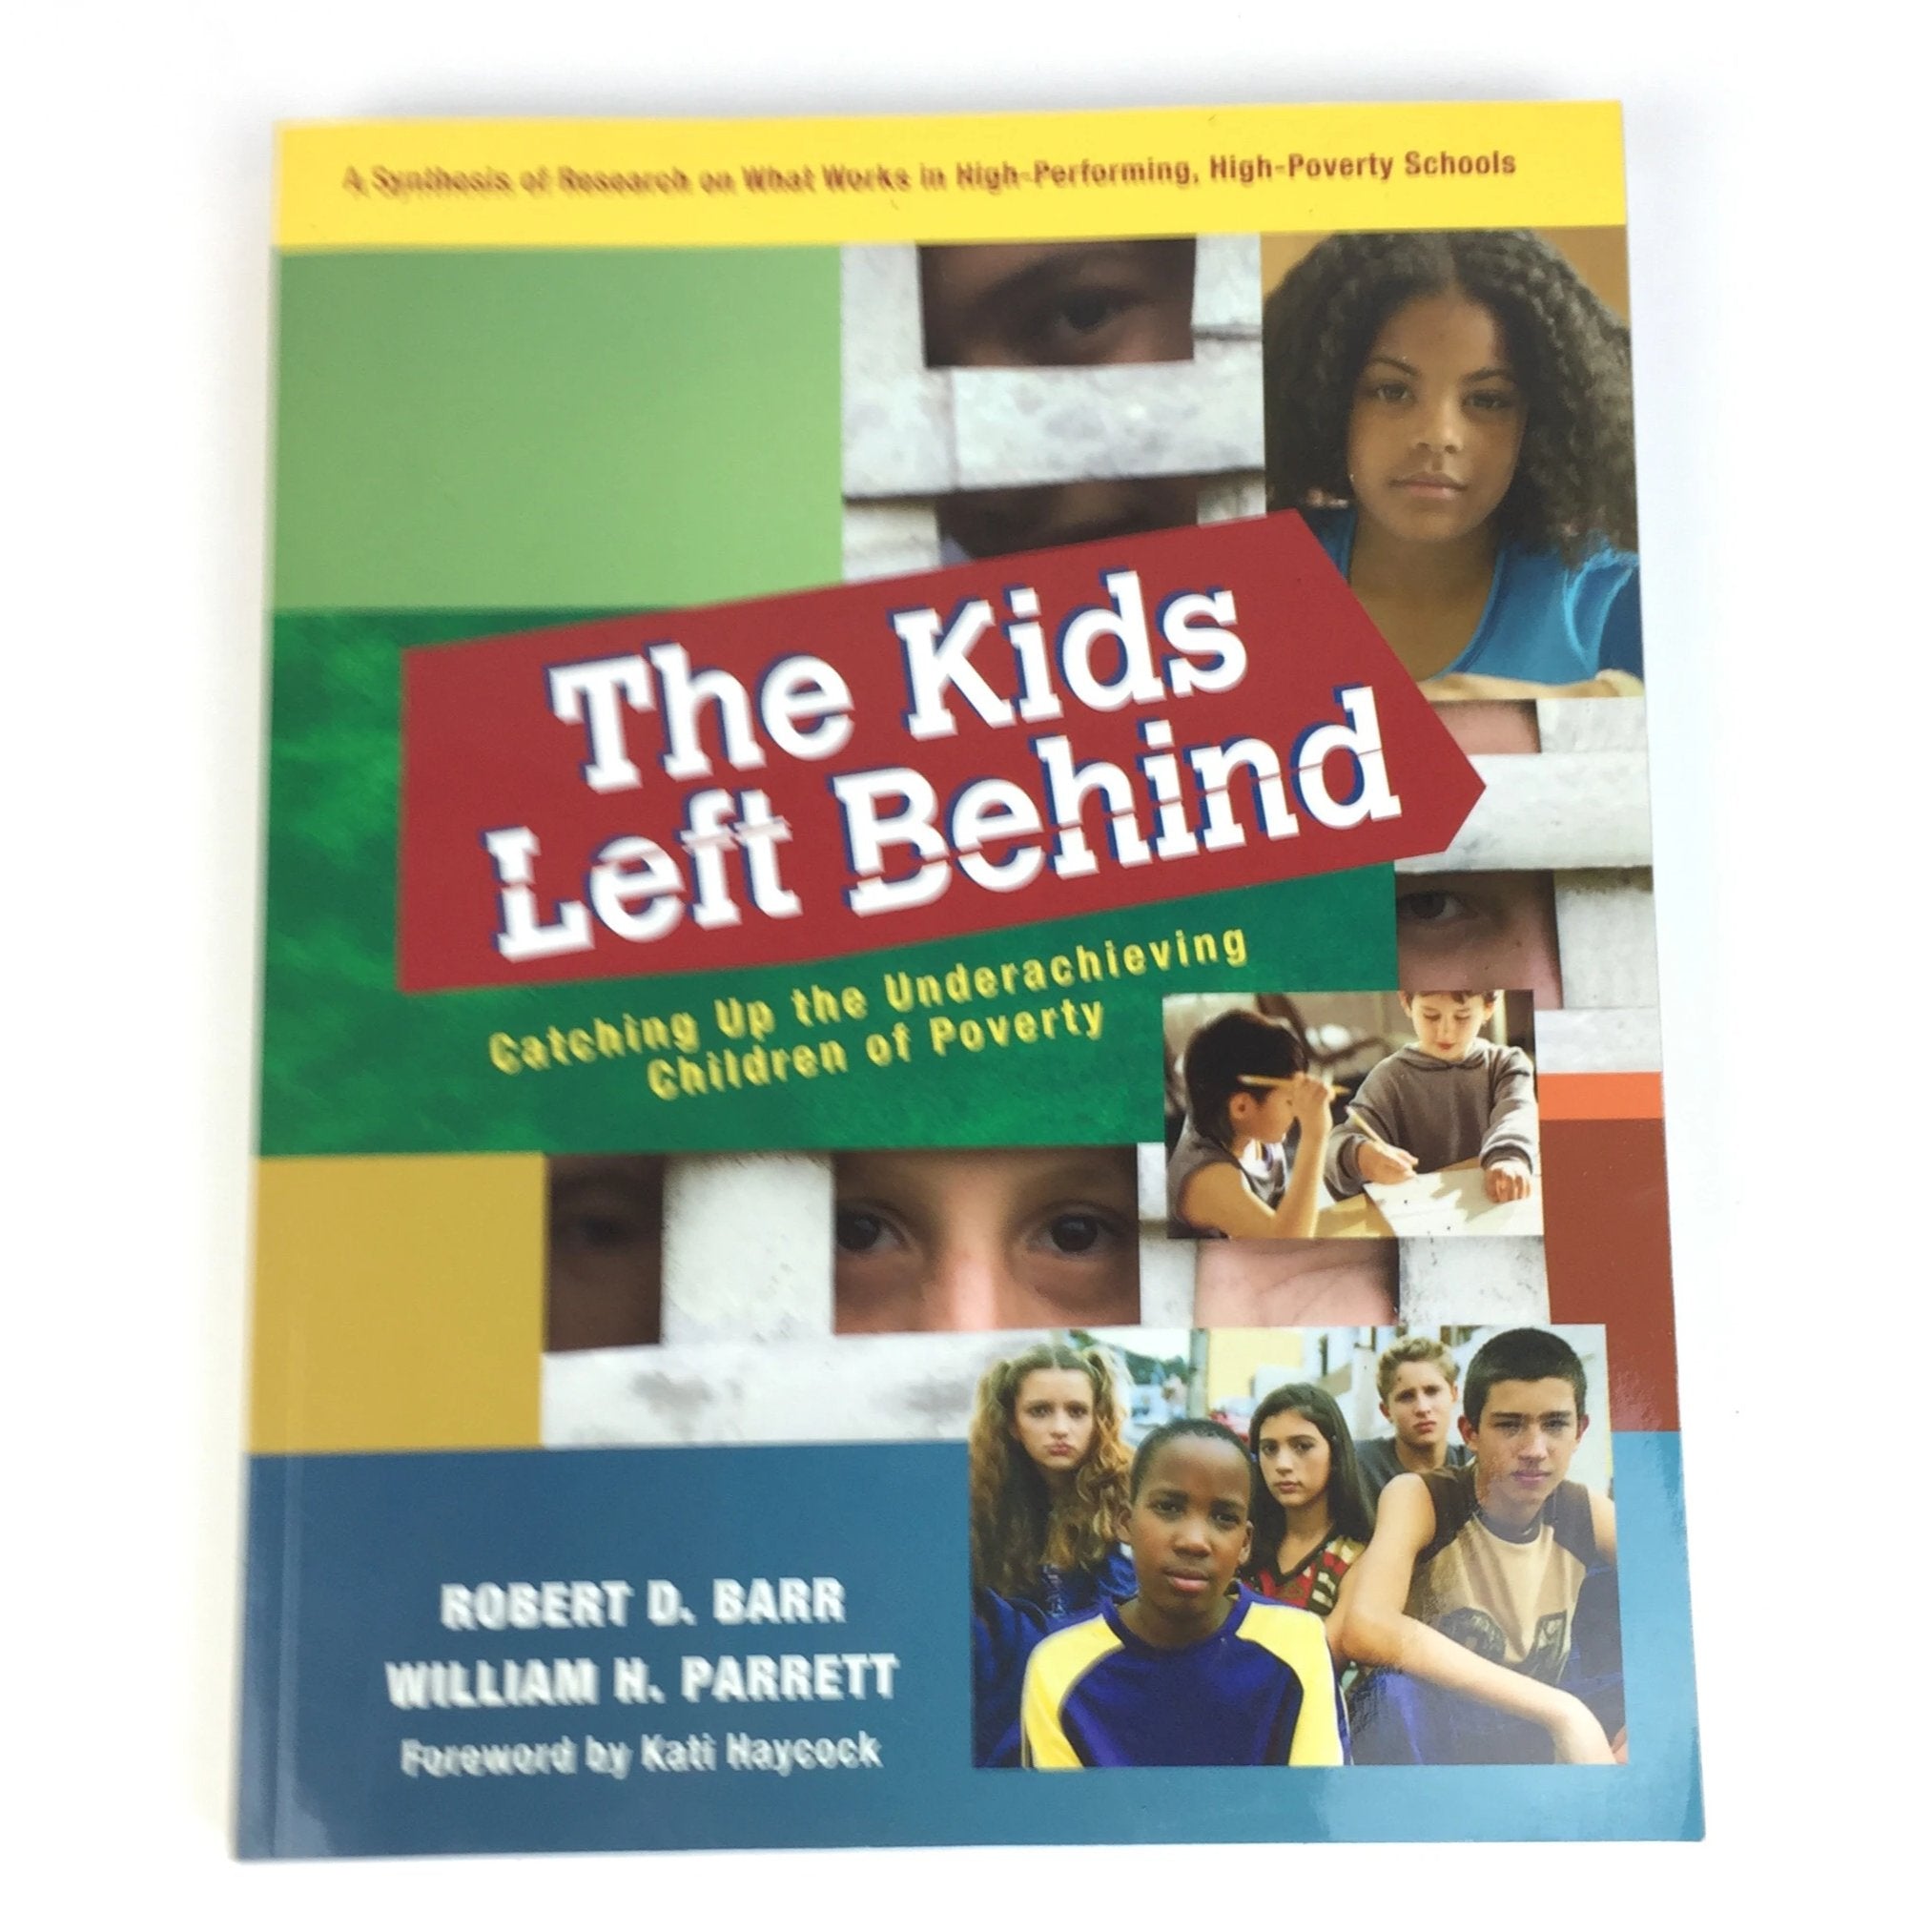 Kids Left Behind : Catching up the Underachieving Children of Poverty by Barr, Parrett